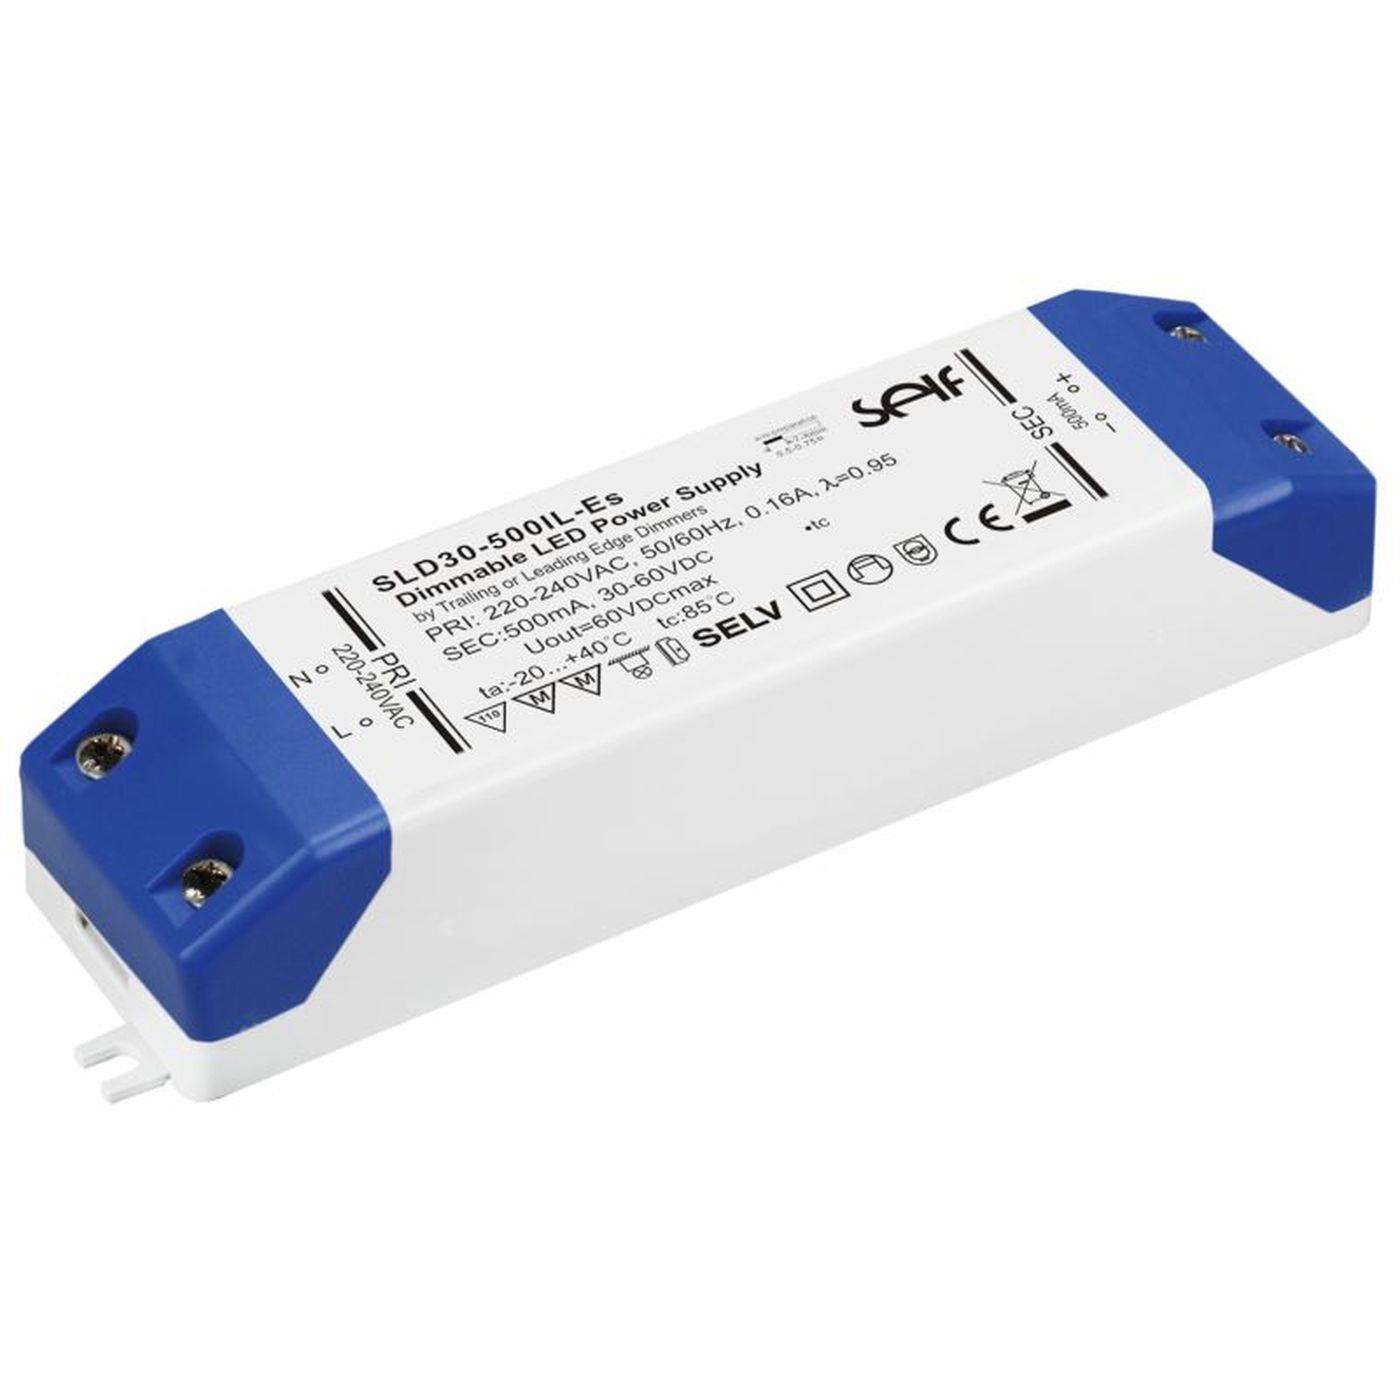 SLD30-600IL-ES 30W 600mA 25...50VDC Constant current LED power supply Driver Transformer Triac Dimmable